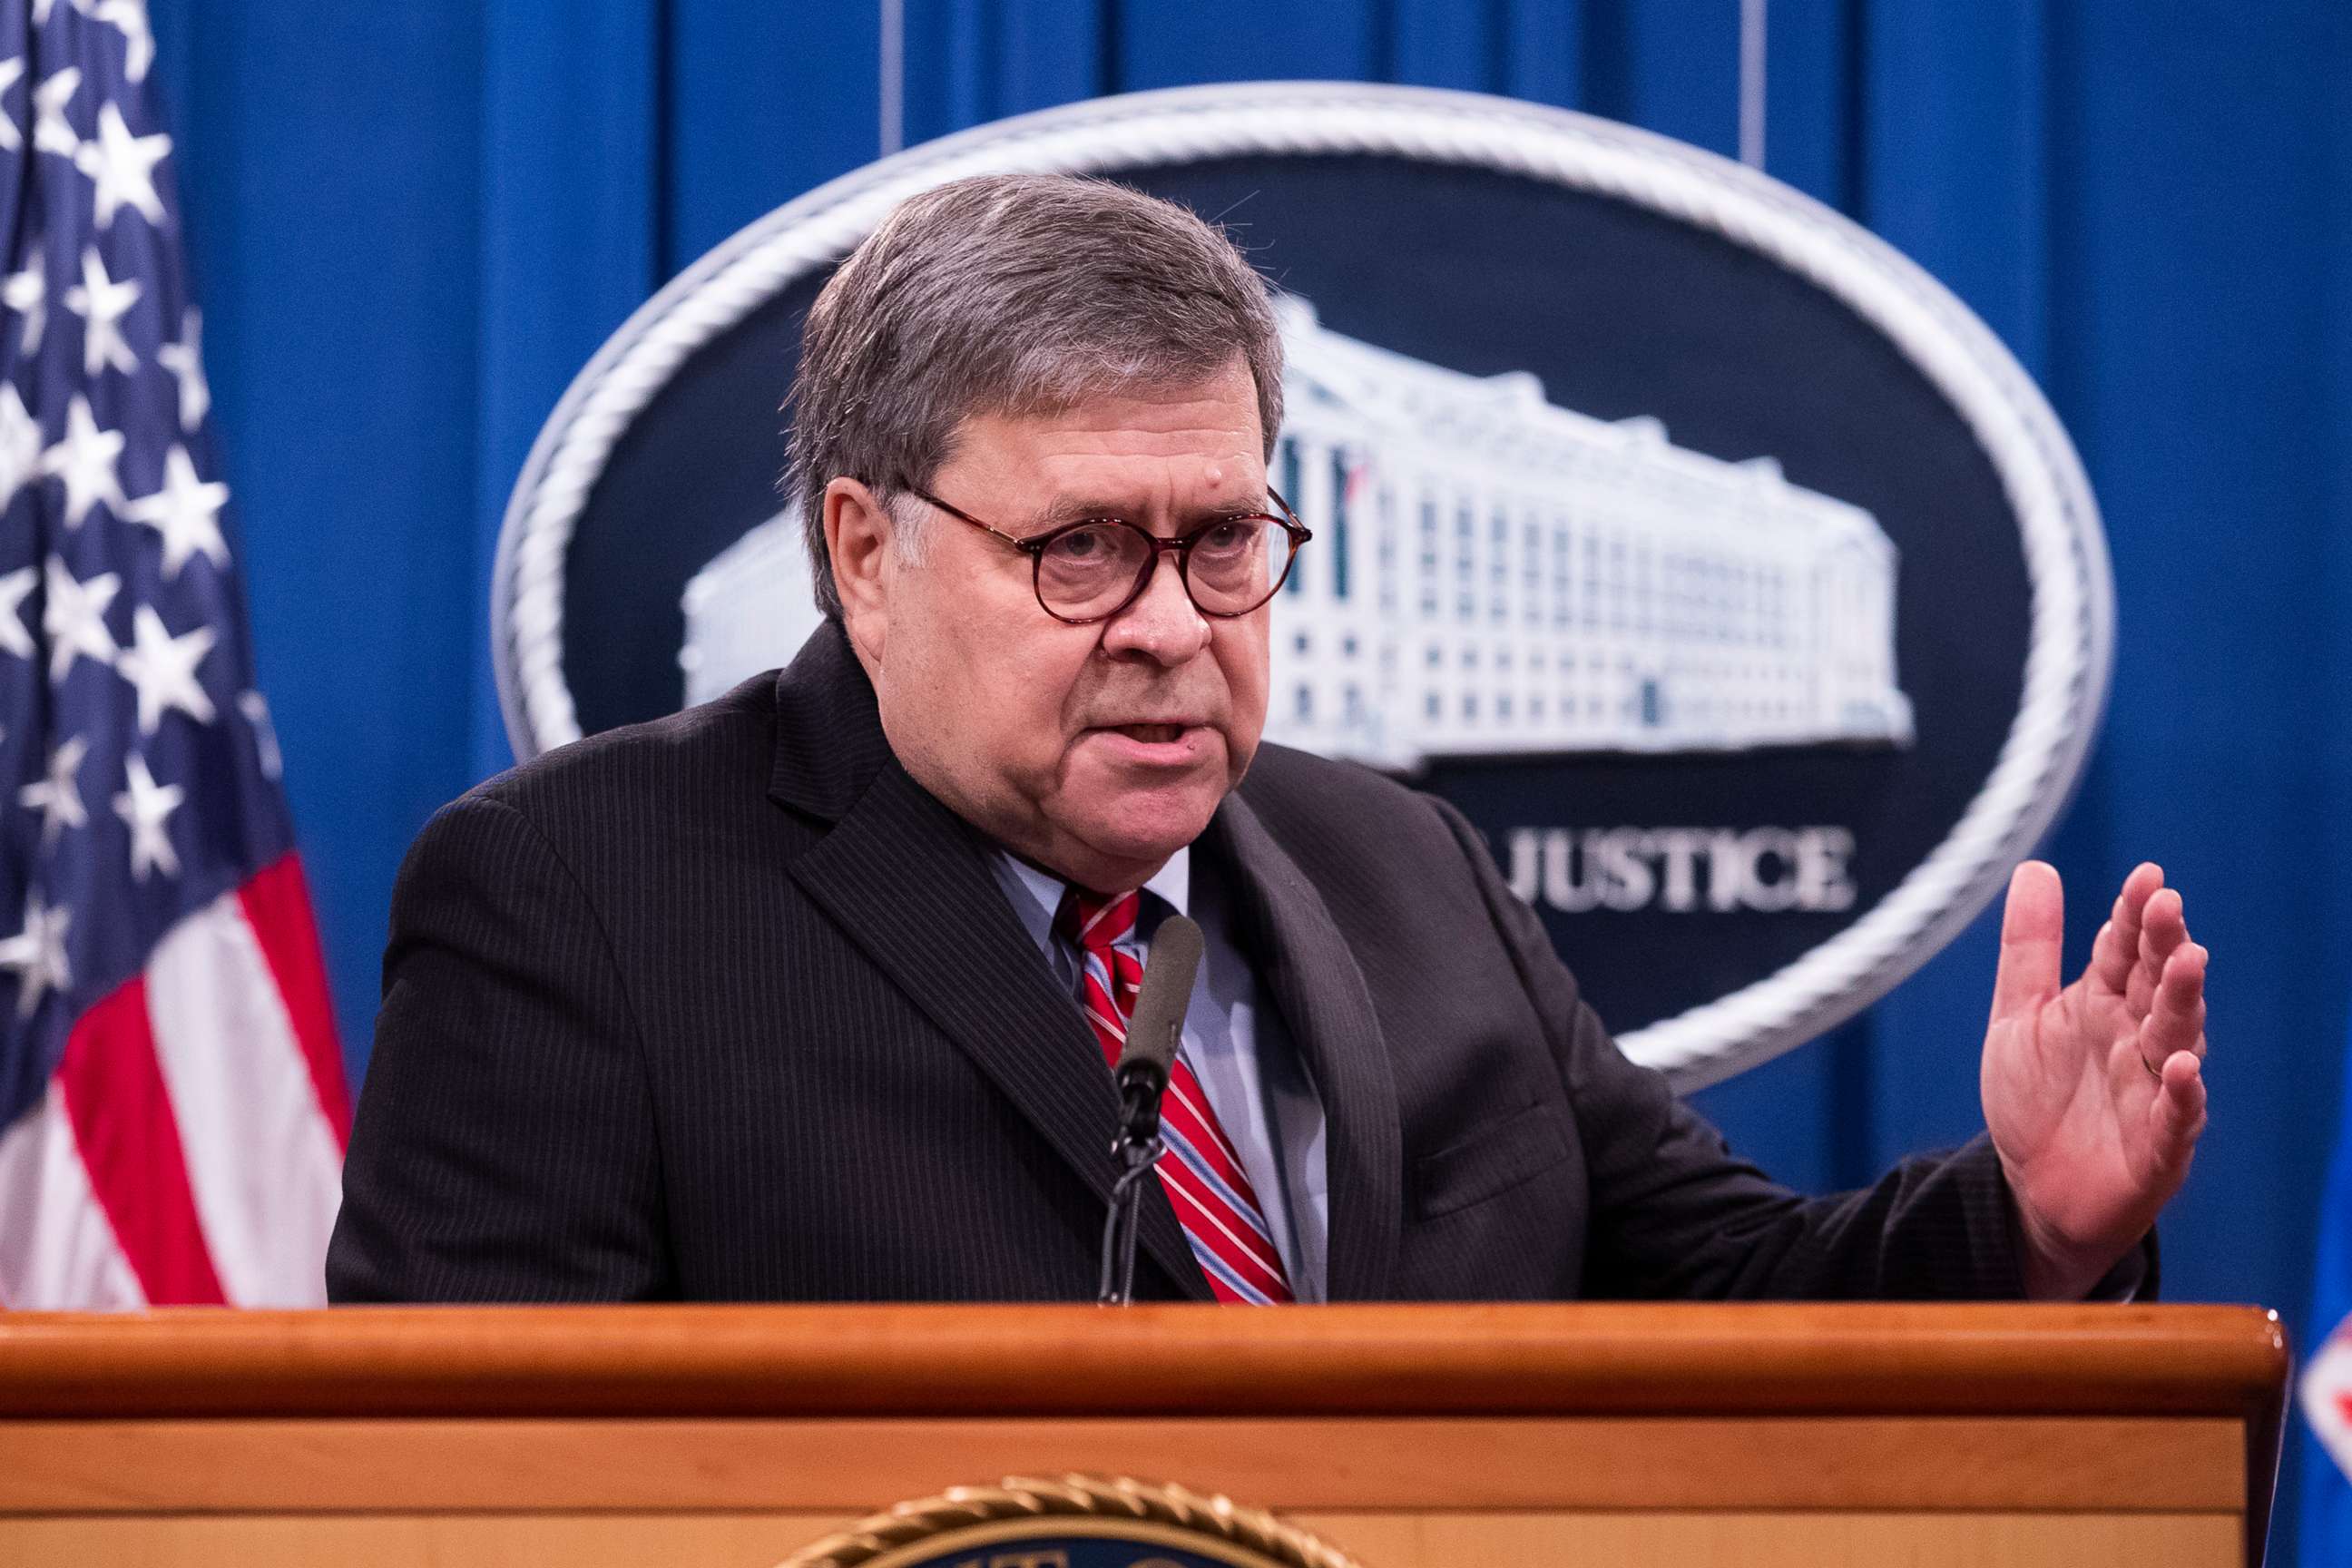 PHOTO: Attorney General William Barr speaks during a news conference, Dec. 21, 2020 at the Justice Department in Washington, D.C.